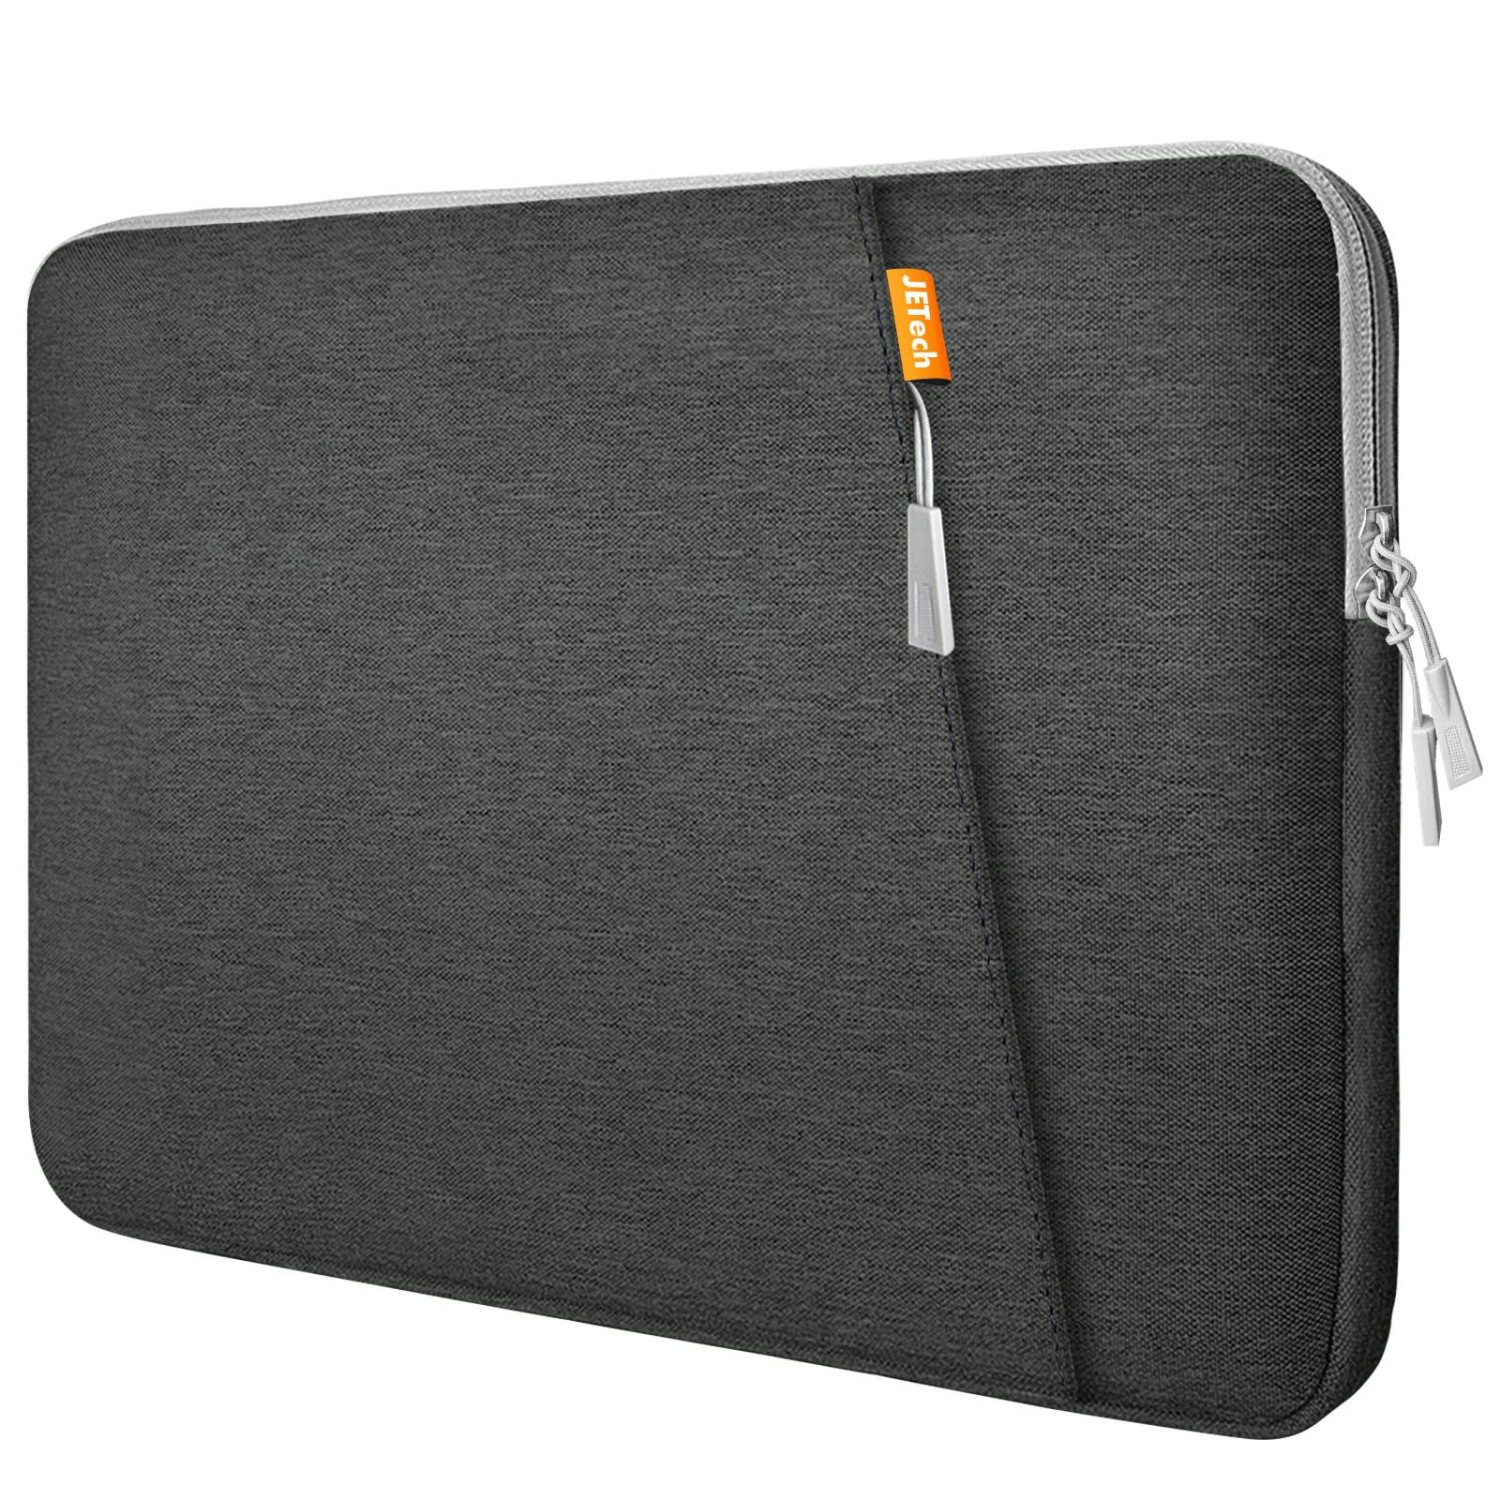 JETech Laptop Sleeve for 13.3-Inch Notebook Tablet iPad Tab, Waterproof Bag Case Briefcase Compatible with 13" MacBook Air,